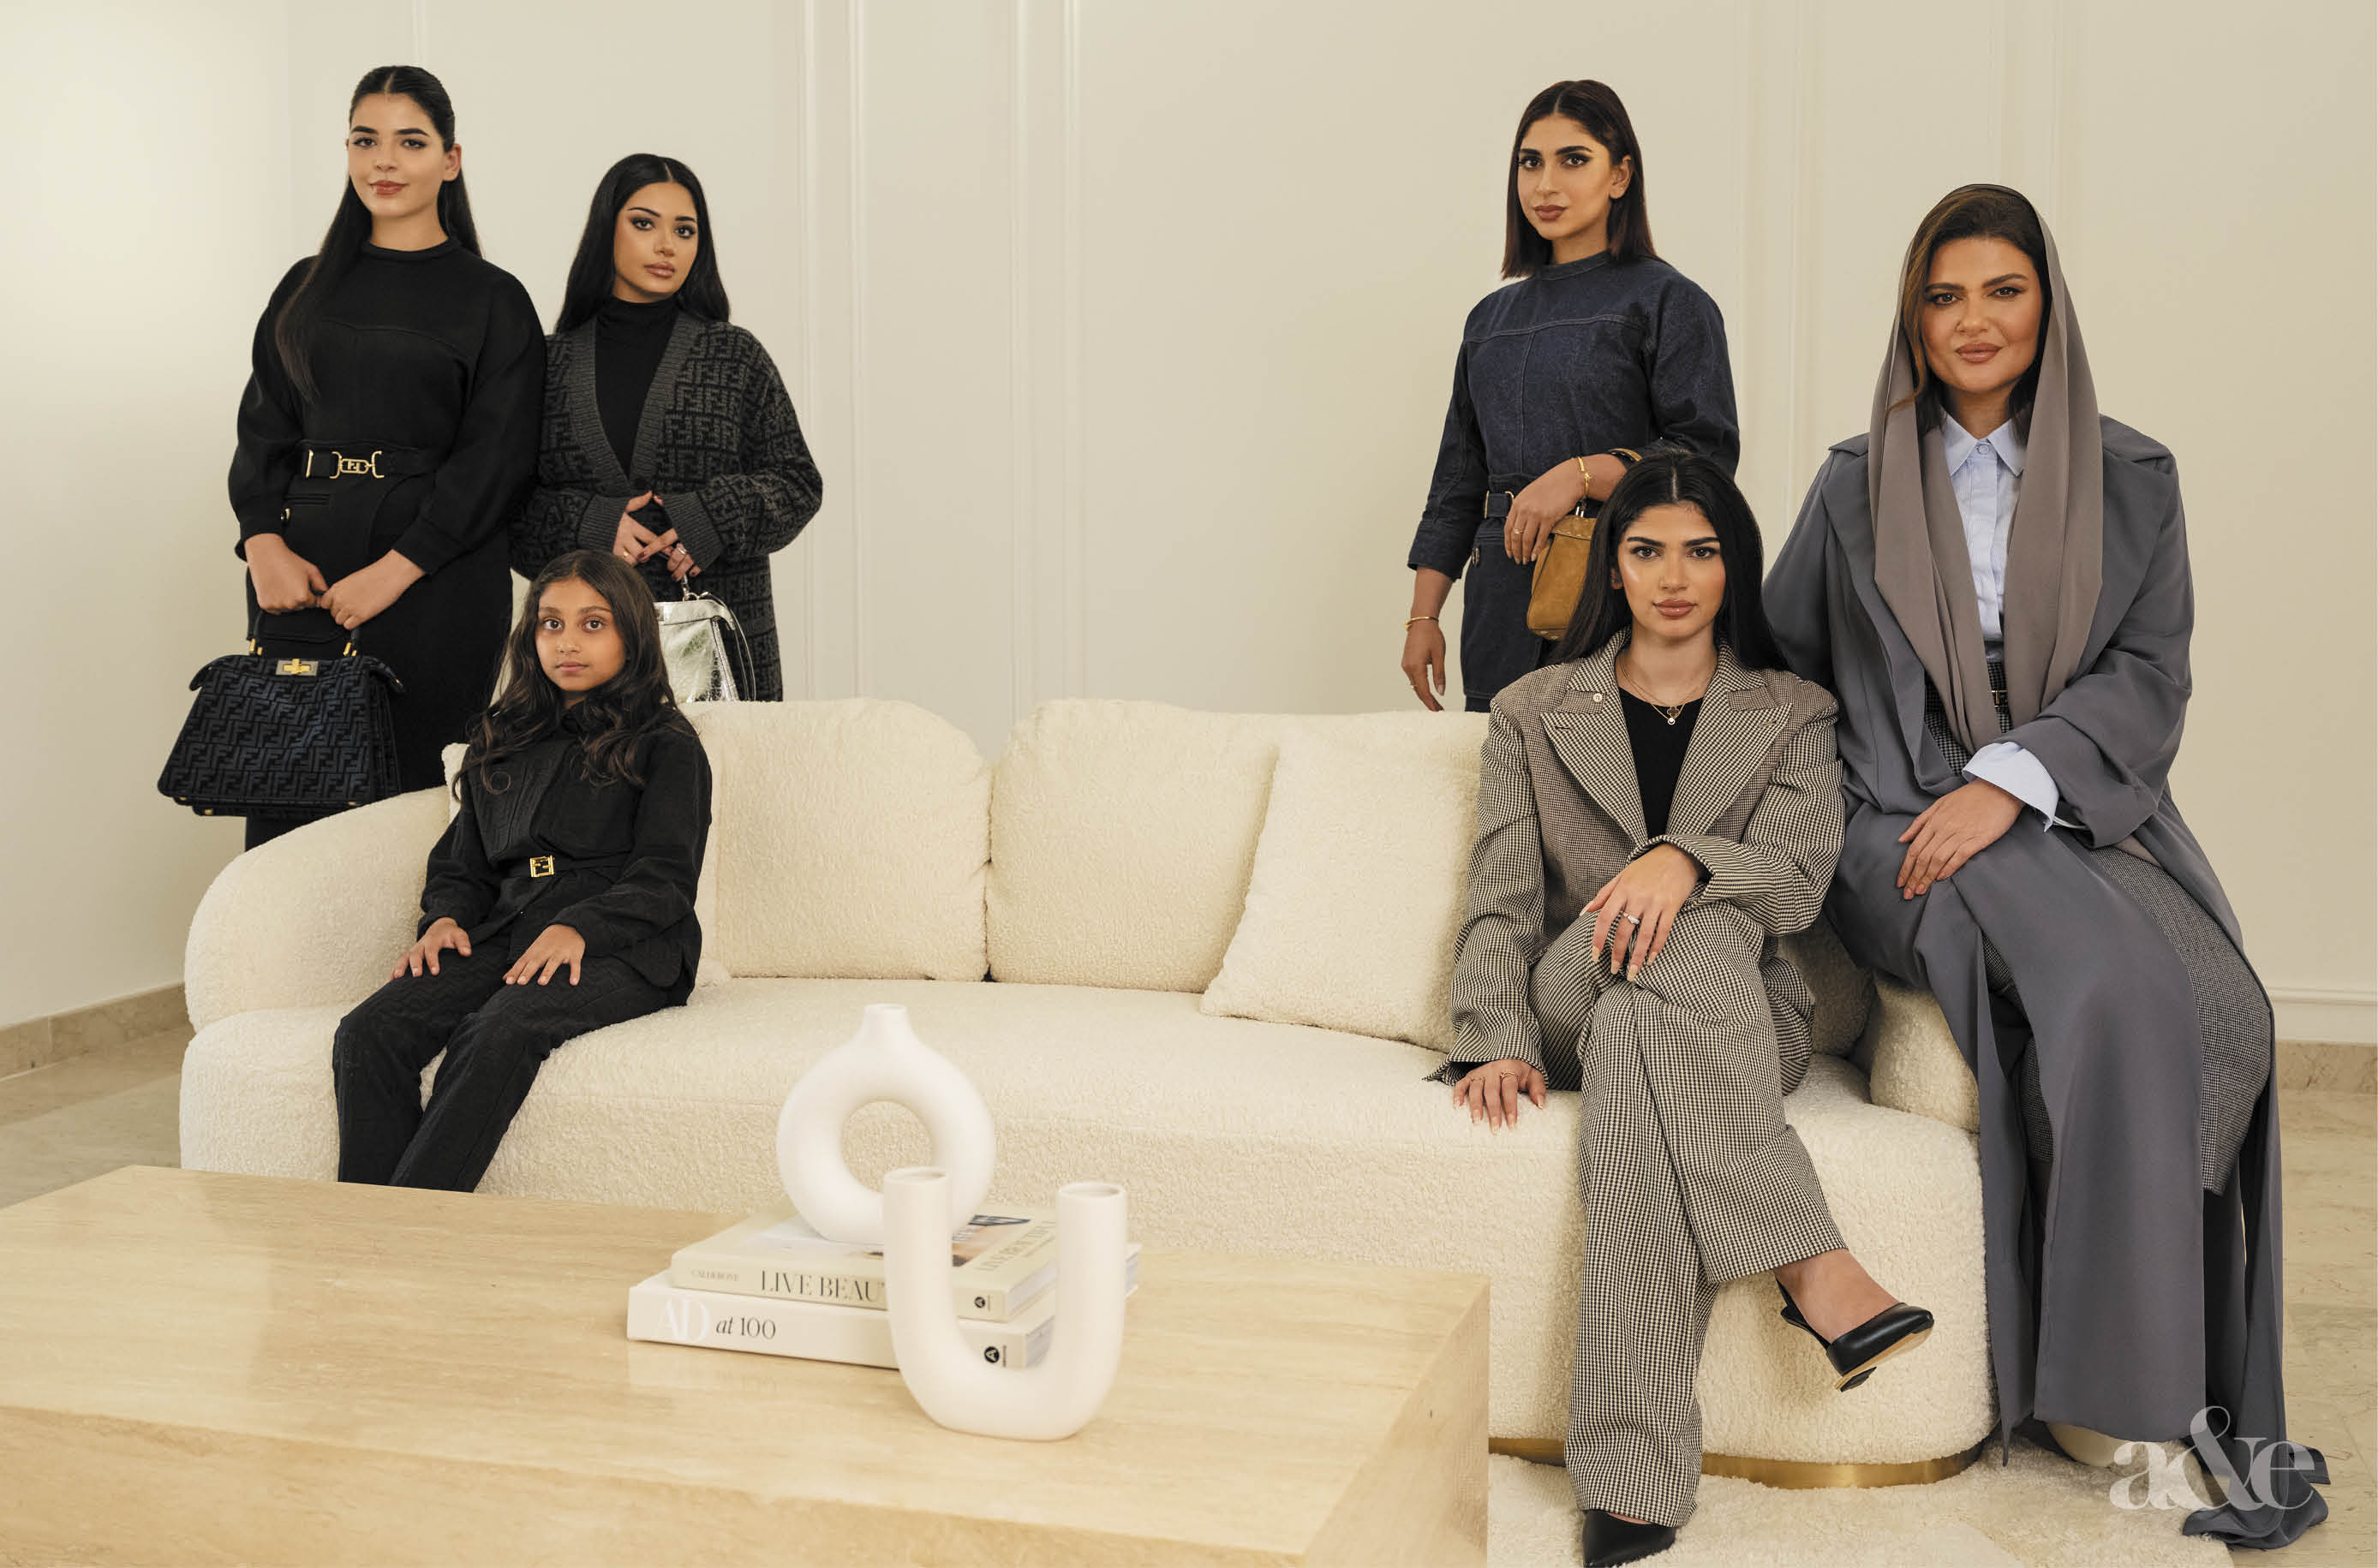 Fur play: Fendi chief on animal rights protesters, Dubai real estate deals  and expanding the fashion brand across the MidEast - Arabian Business